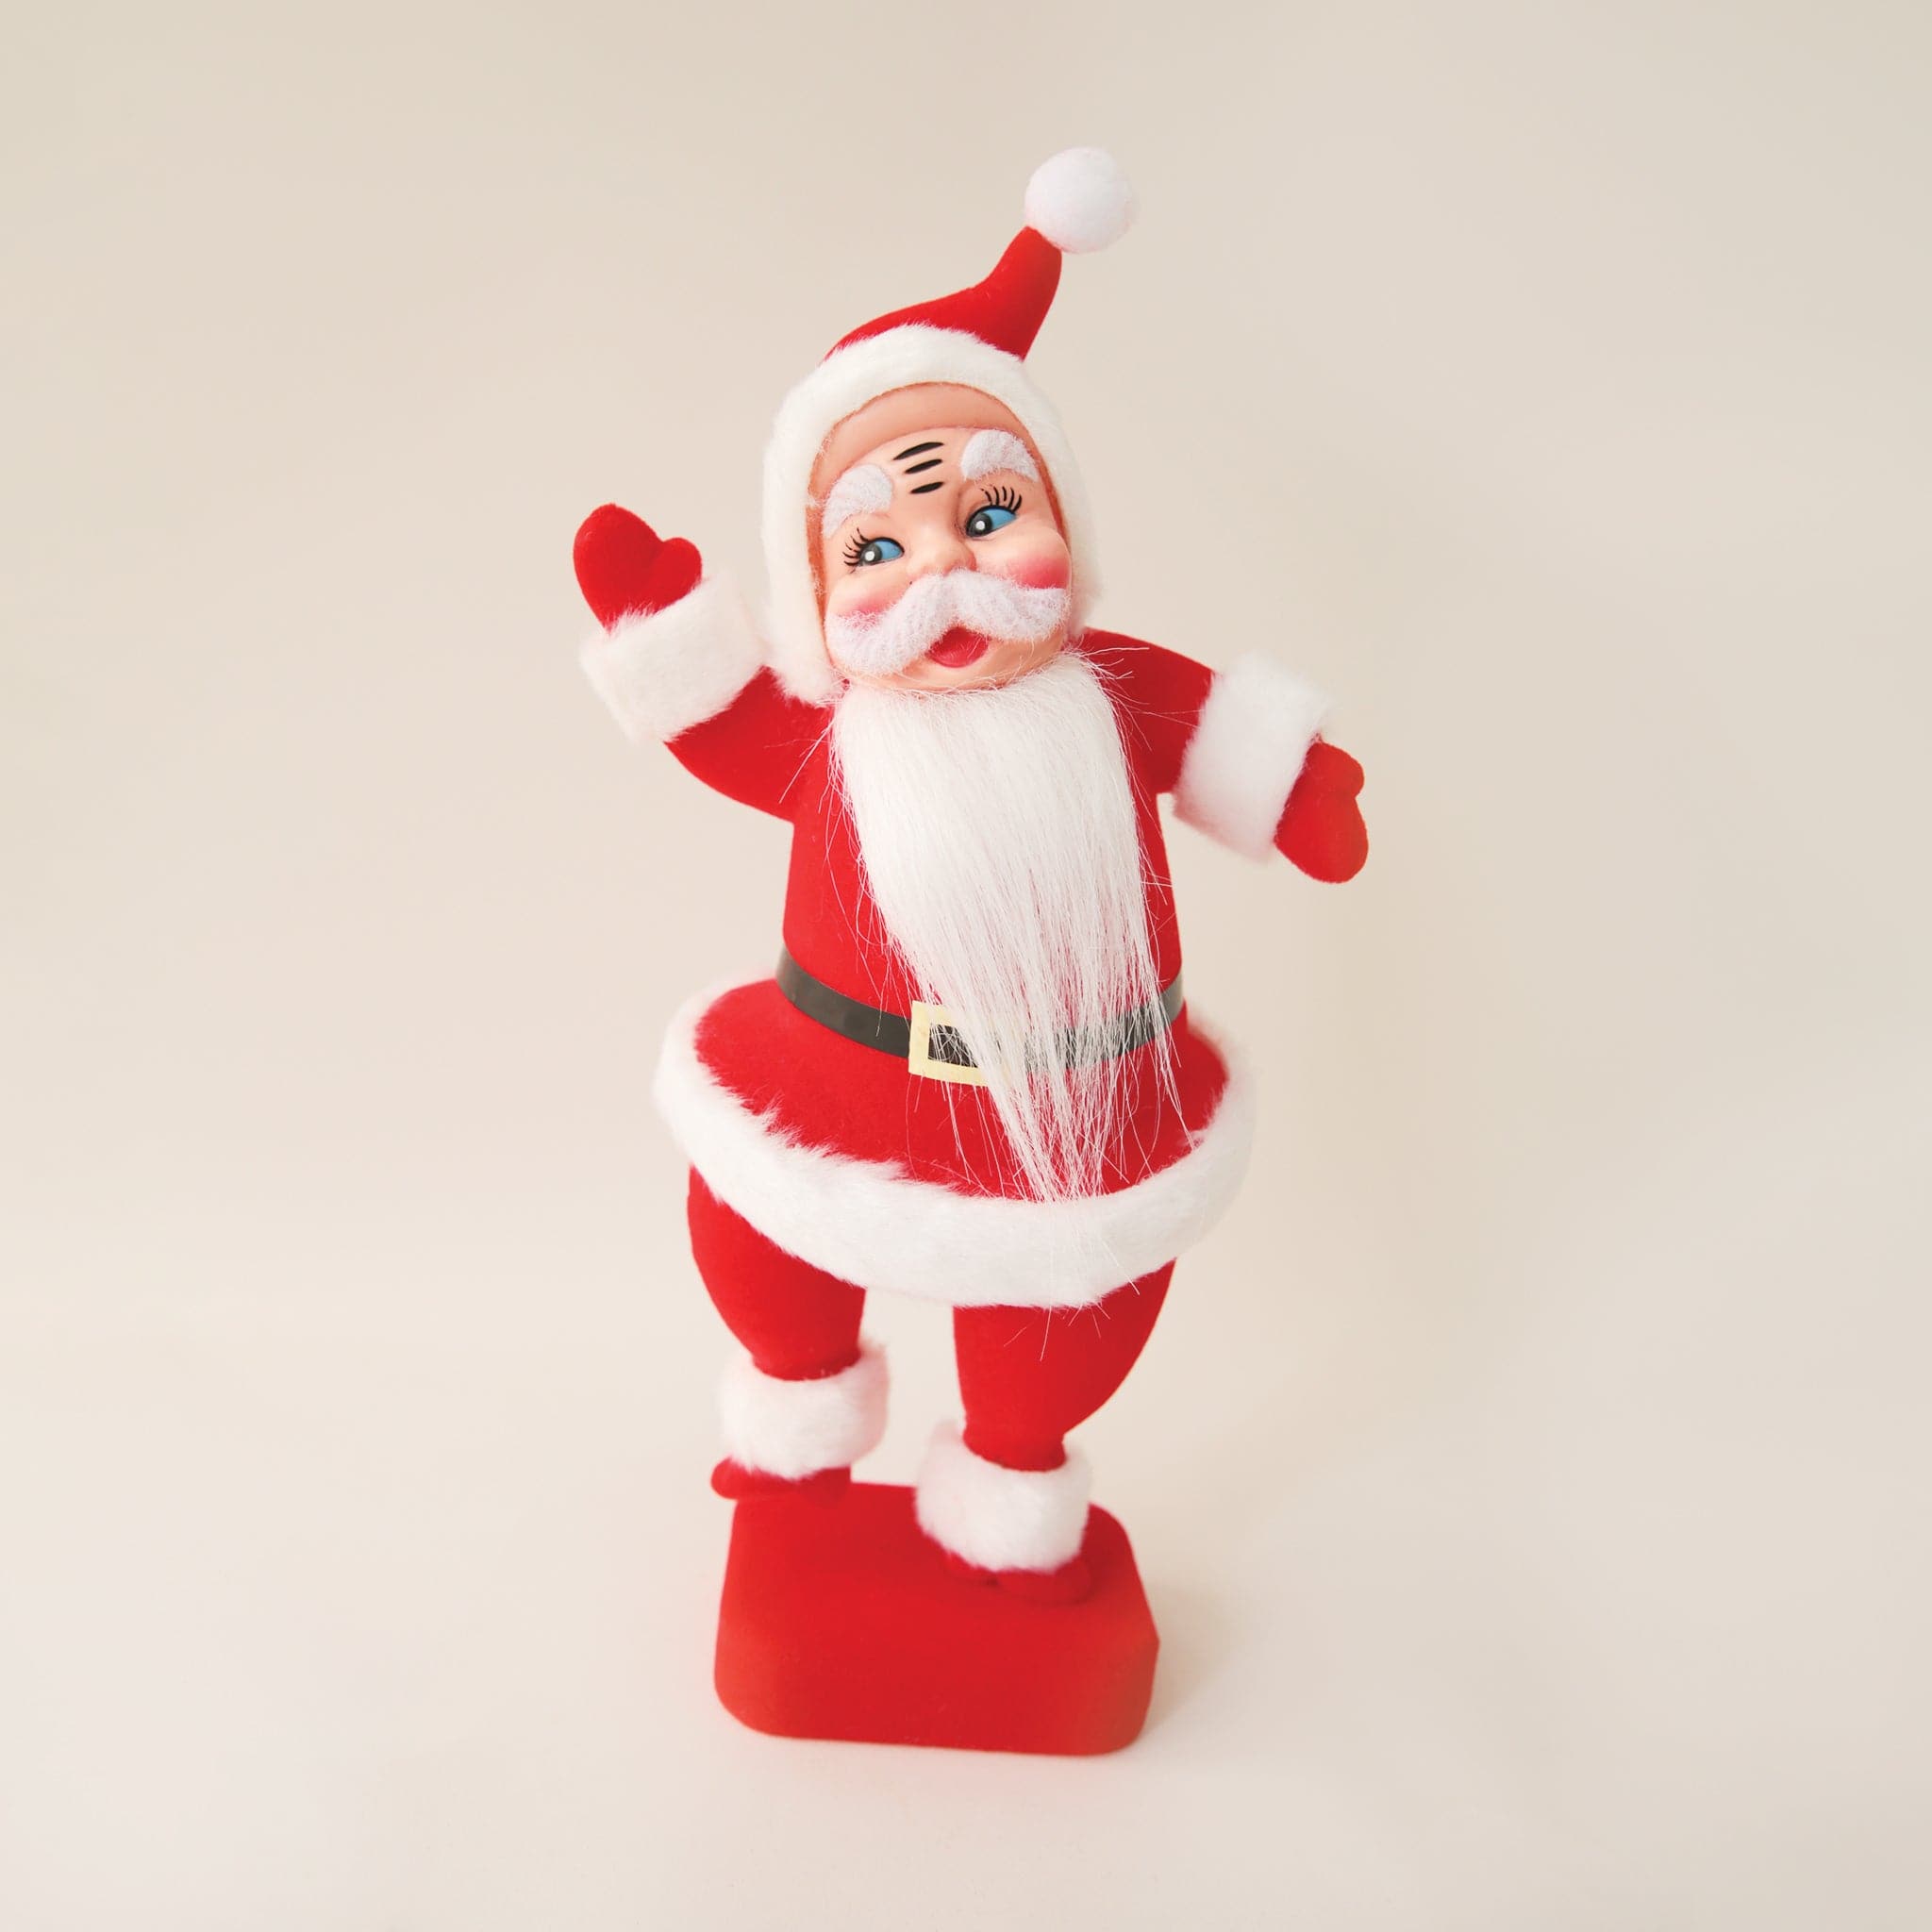 A plastic Santa figurine with a red suit and furry detailing on the cuffs, jacket and hat.